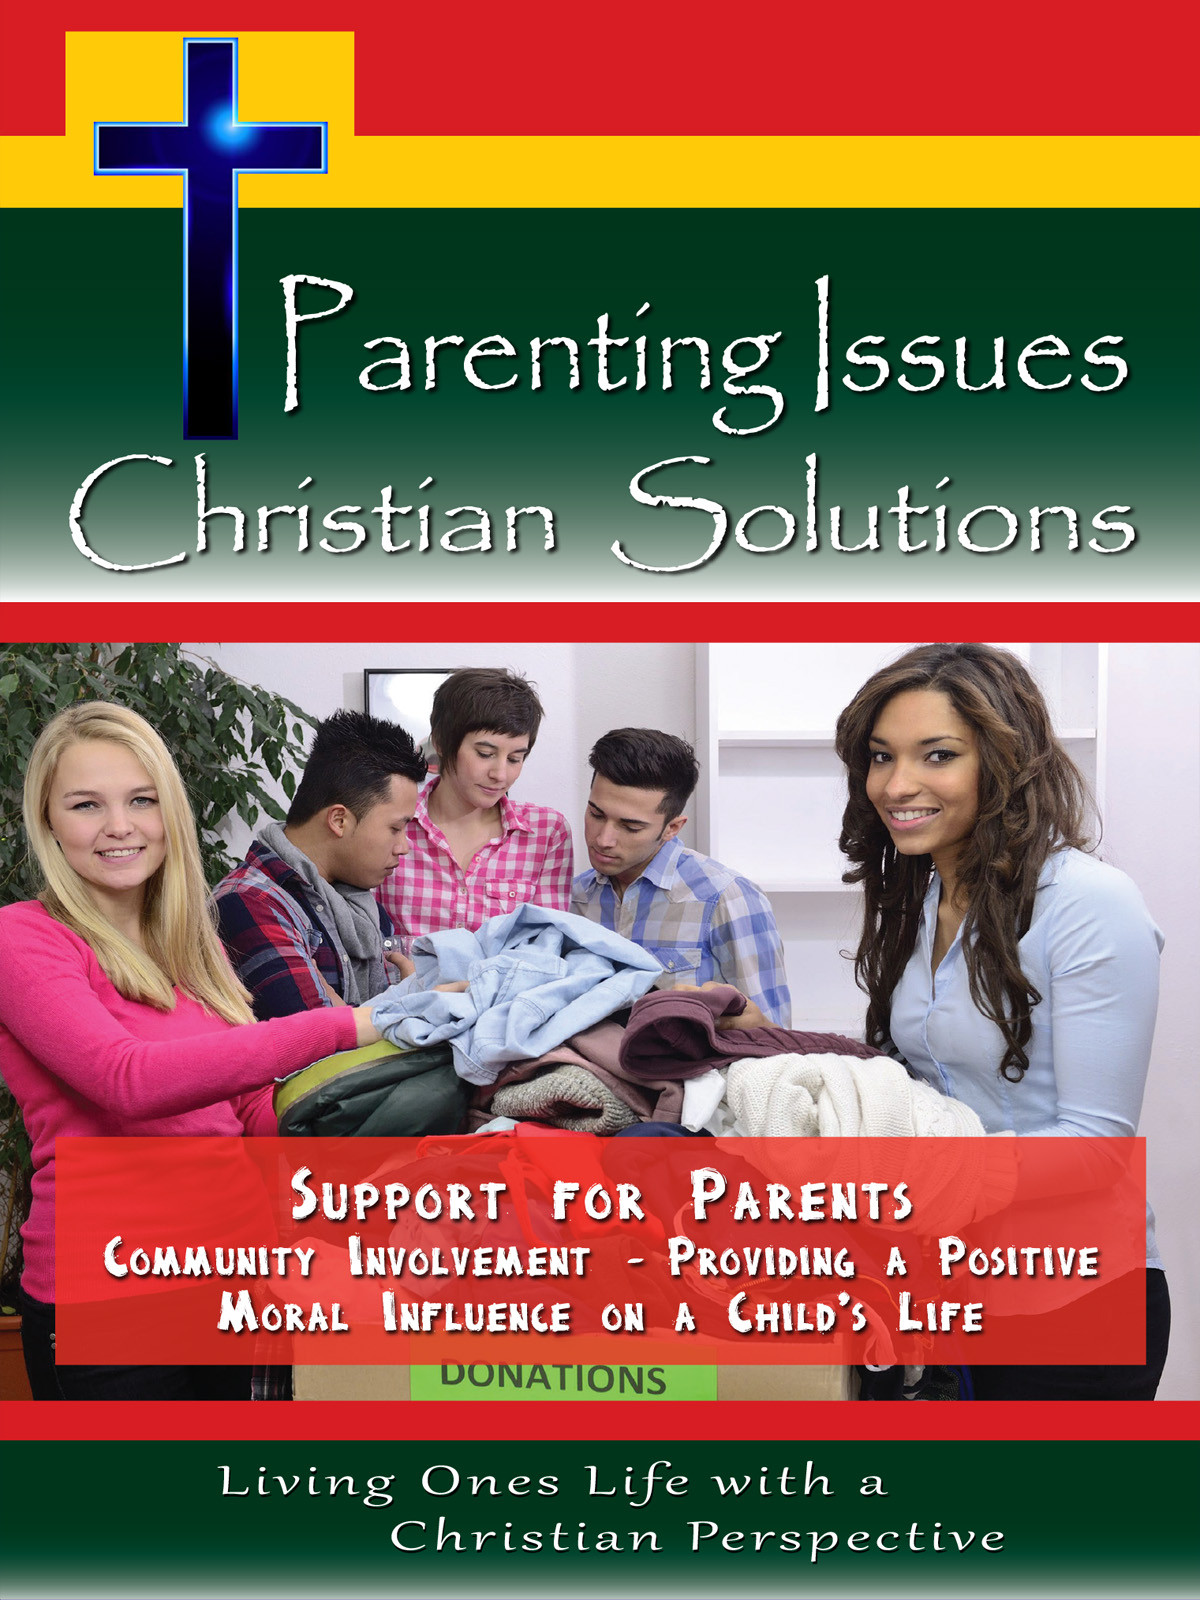 CH10005 - Support for Parents Community Involvement Providing a Positive Moral Influence on a Child's Life